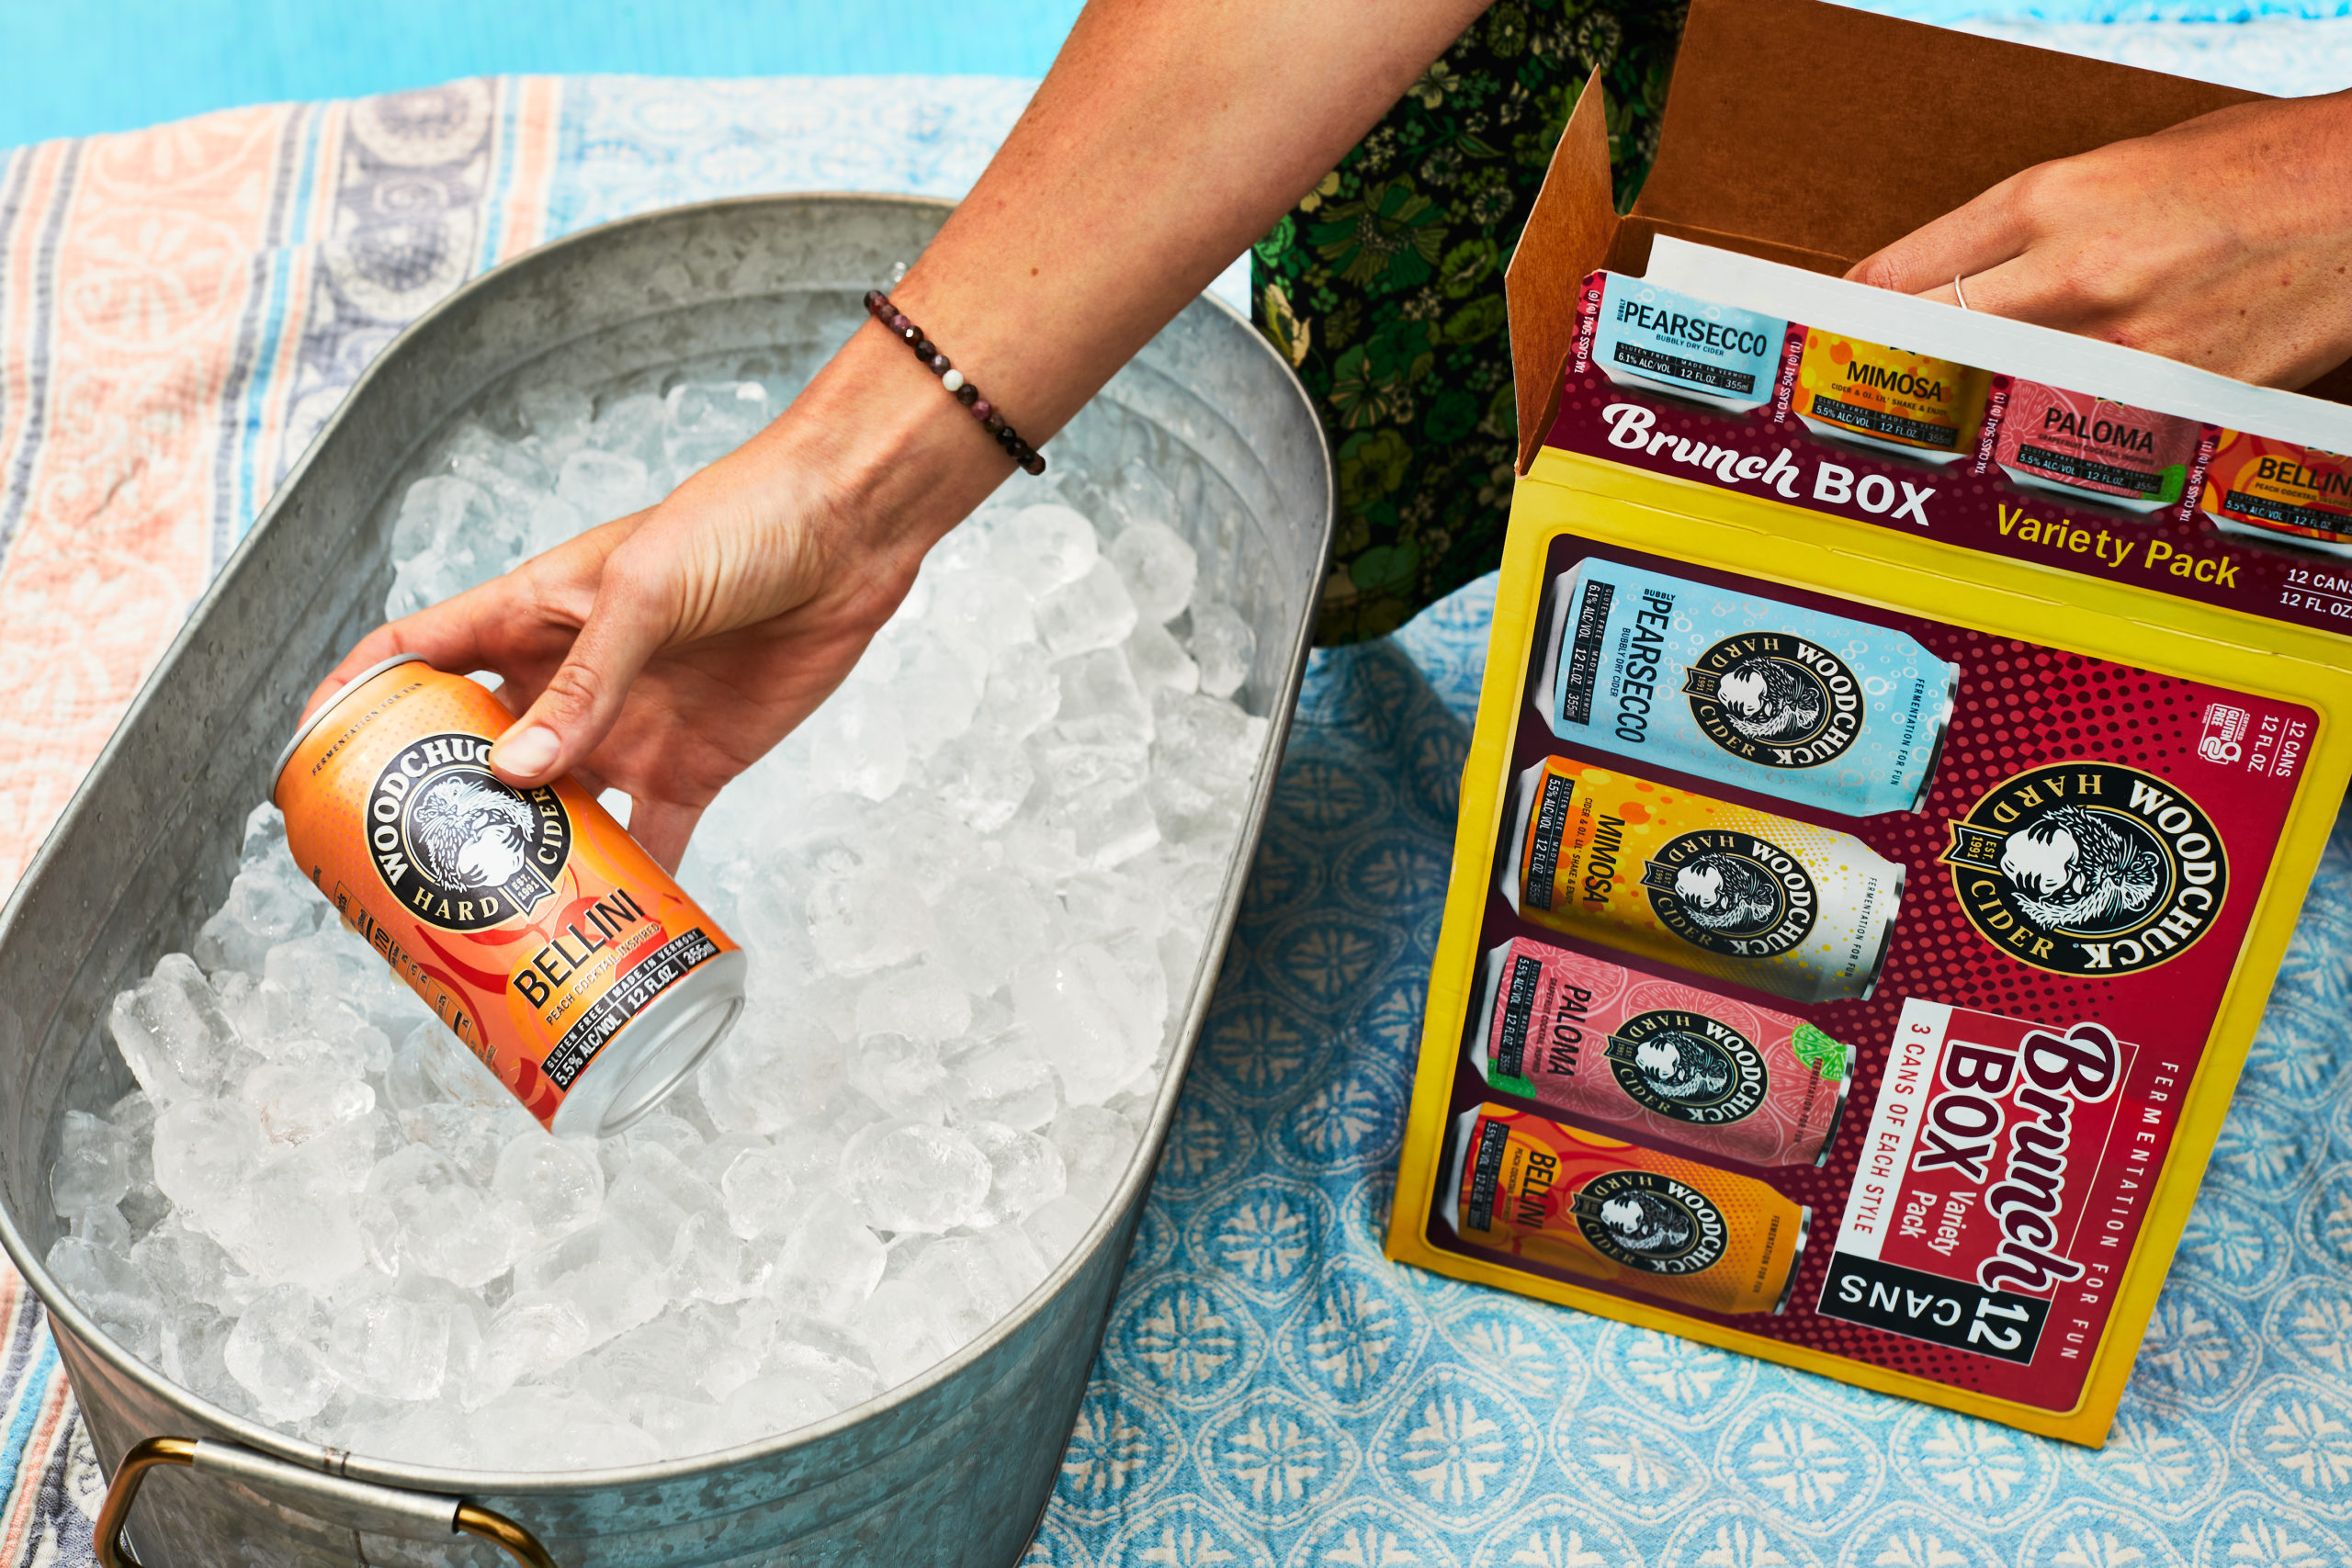 A hand placing a 12 oz can of Woodchuck Bellini Hard Seltzer in a bucket of ice while grabbing another can out of Woodchucks Brunch Box 12-can variety pack